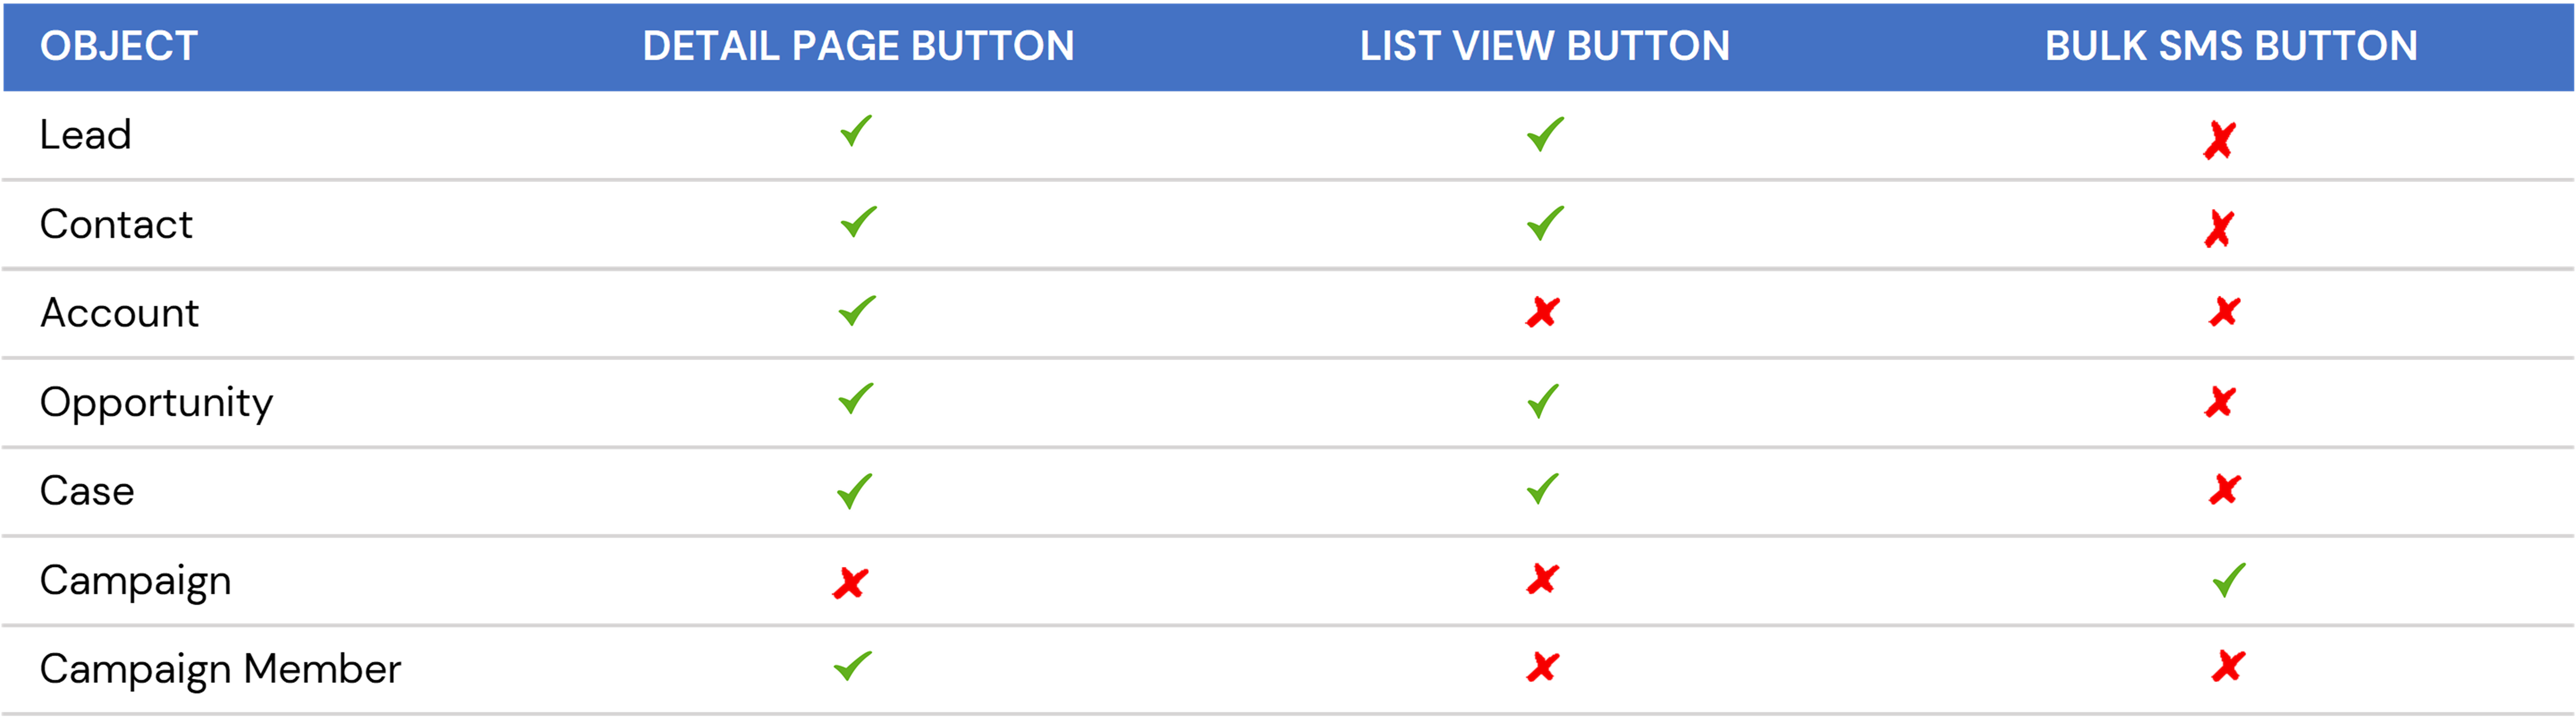 SMS_Button_Table.png